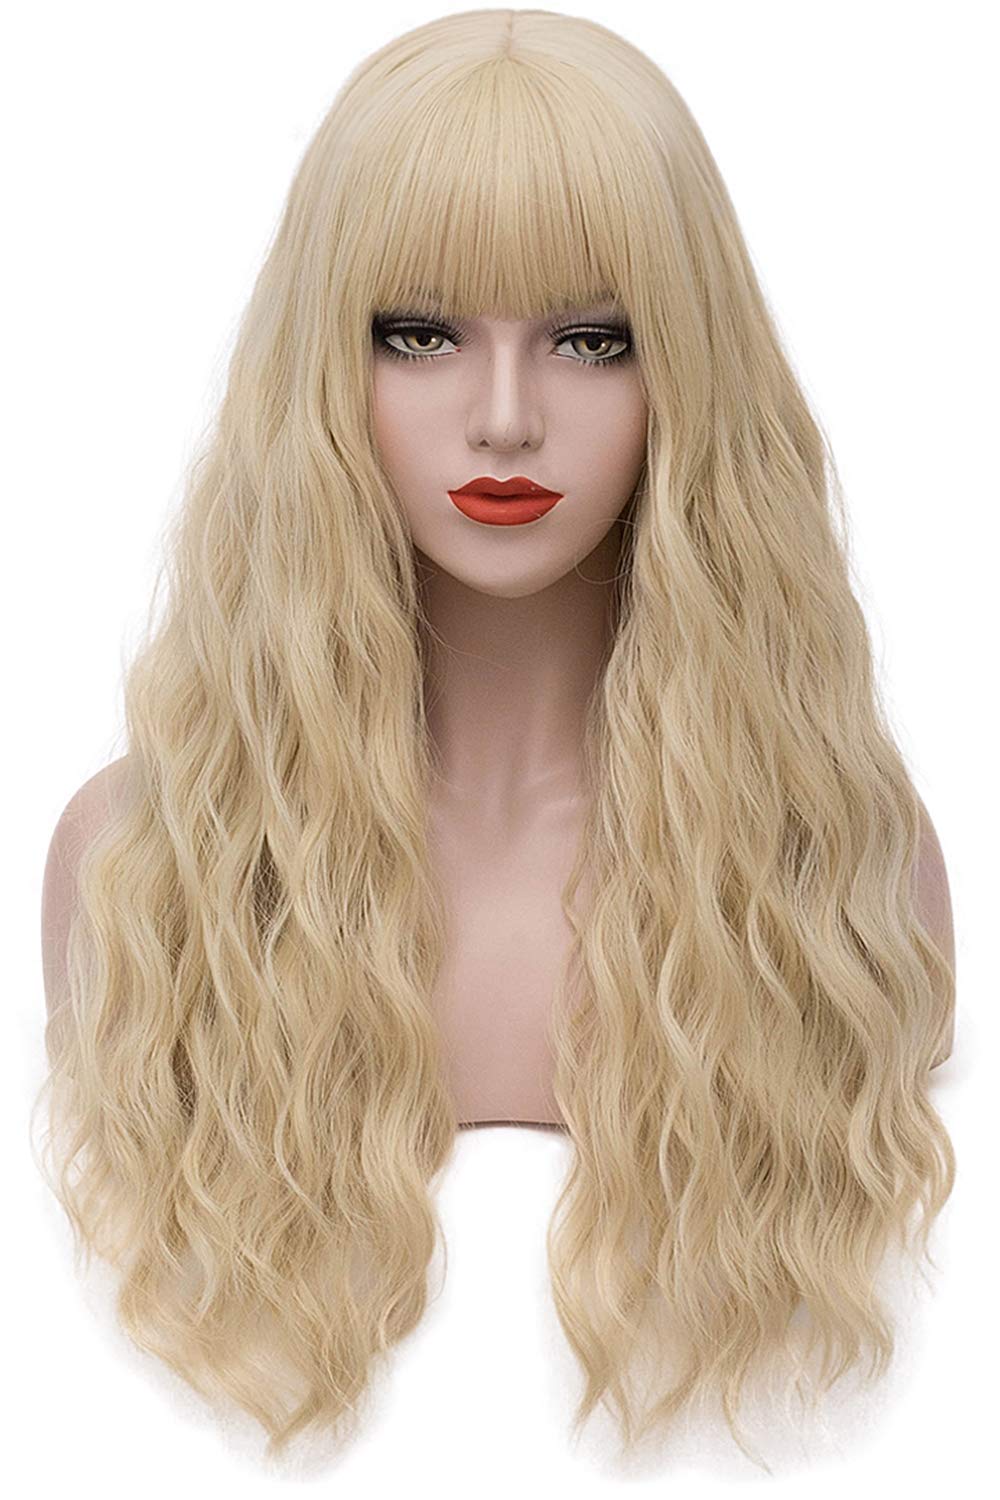 Price:$19.99     Mildiso Long Blonde Wigs for Women Fluffy Curly Wavy Cosplay Halloween Wig Heat Resistant Hair wig with Bangs M062GD   Beauty